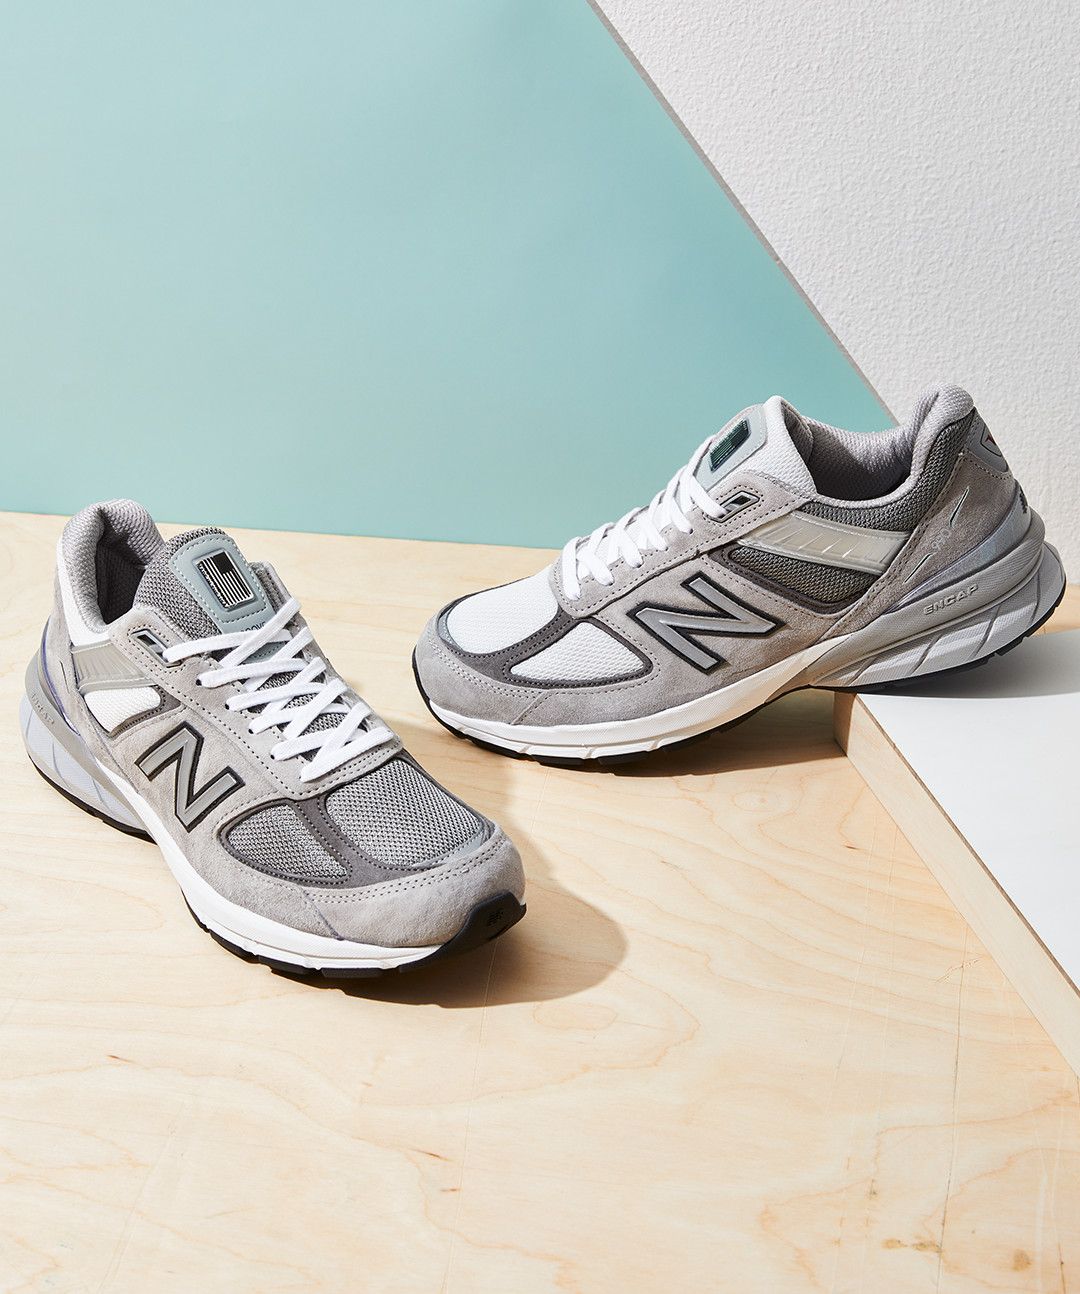 New Balance And Japanese Brand Beams Teamed Up On The Ultimate Dad Shoes